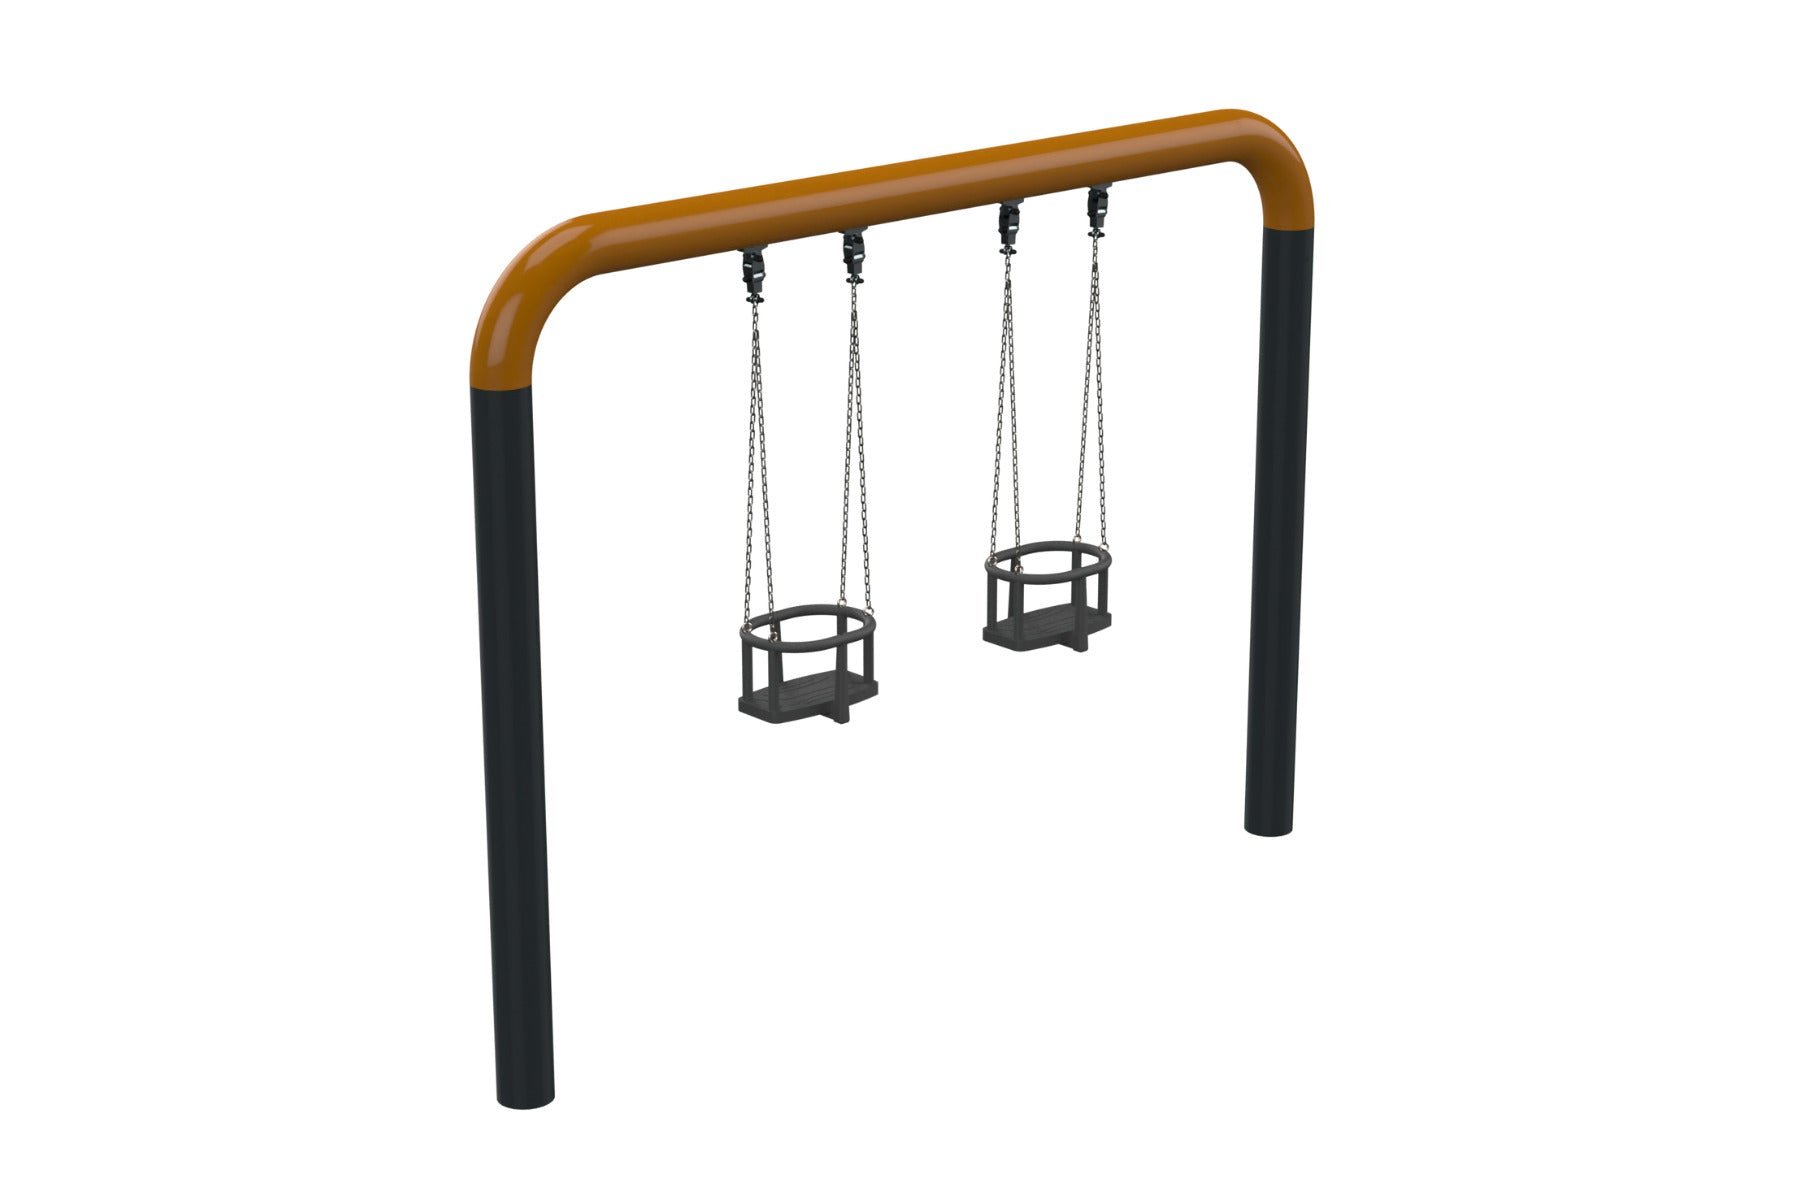 Psagot-Commercial-Playgrounds-Square-Frame-Swing-Style-1